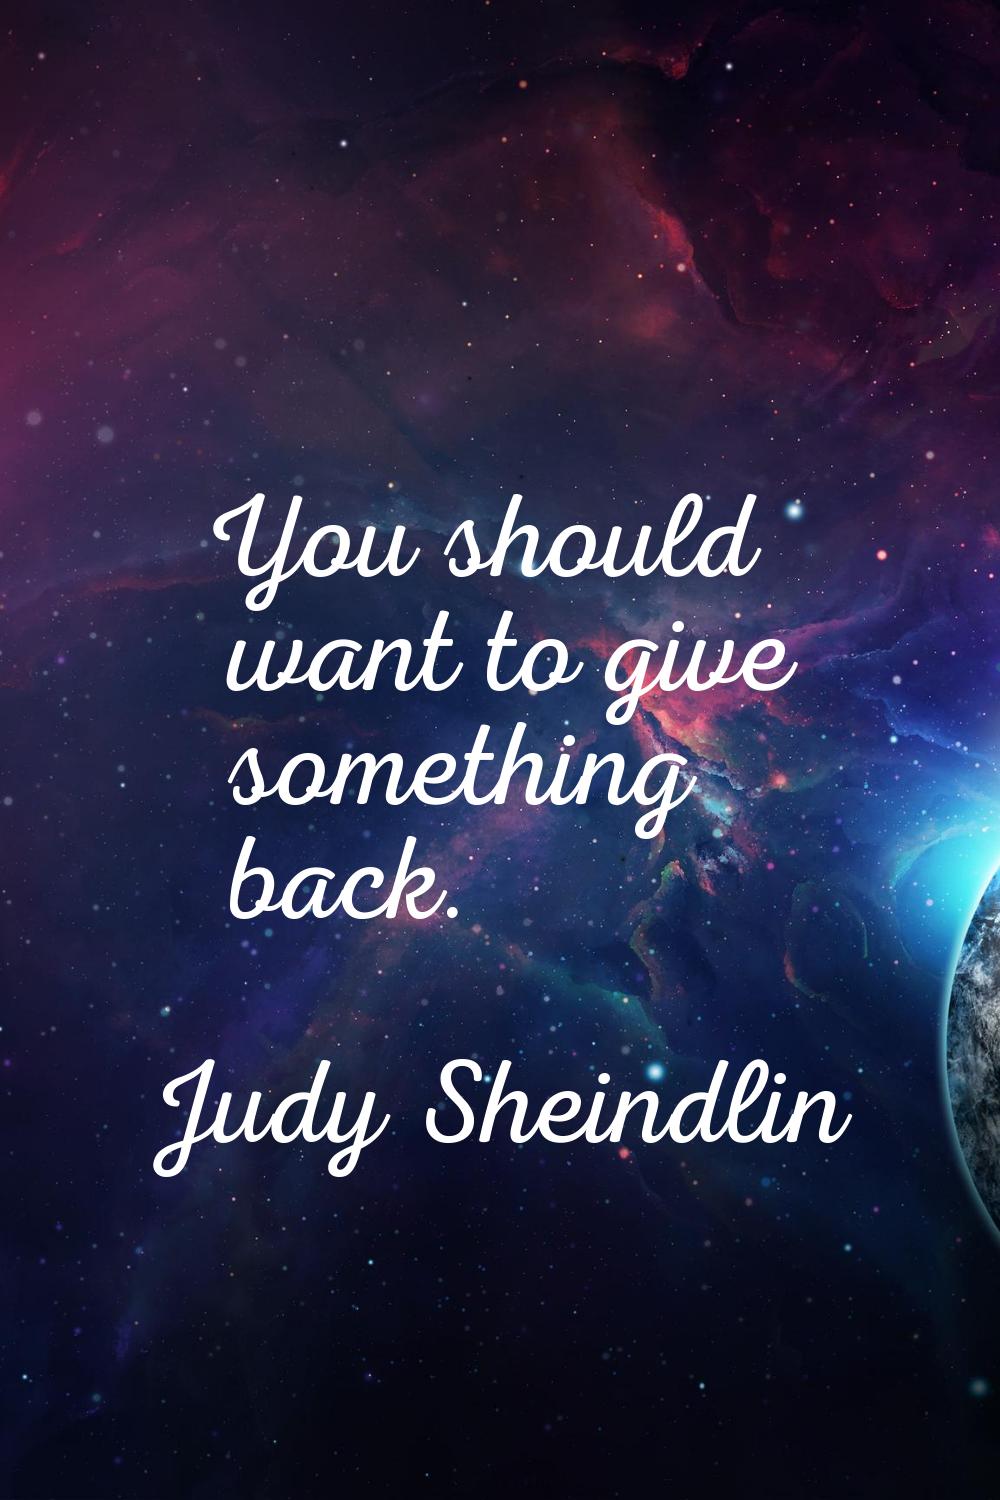 You should want to give something back.